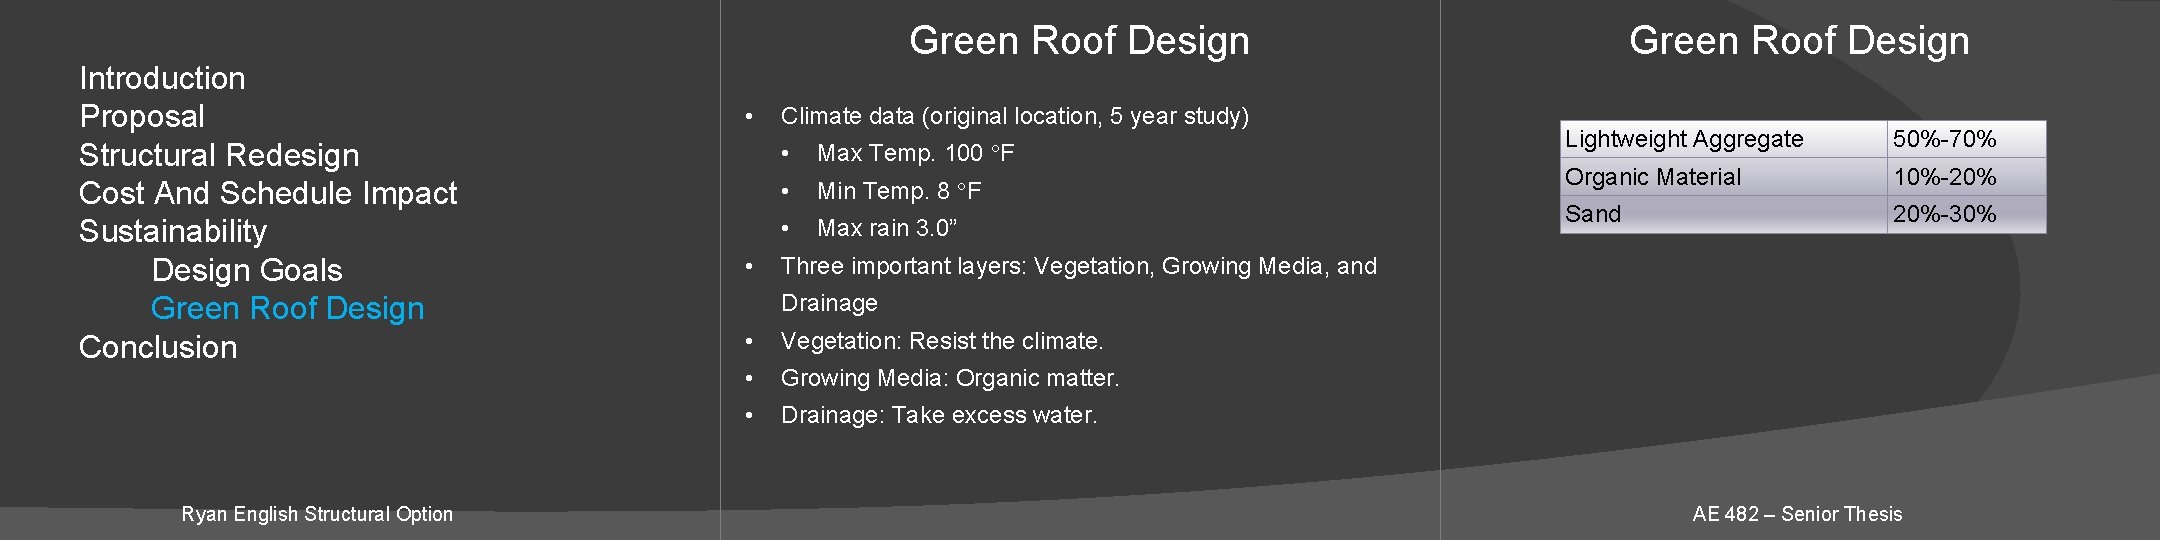 Introduction Proposal Structural Redesign Cost And Schedule Impact Sustainability Design Goals Green Roof Design